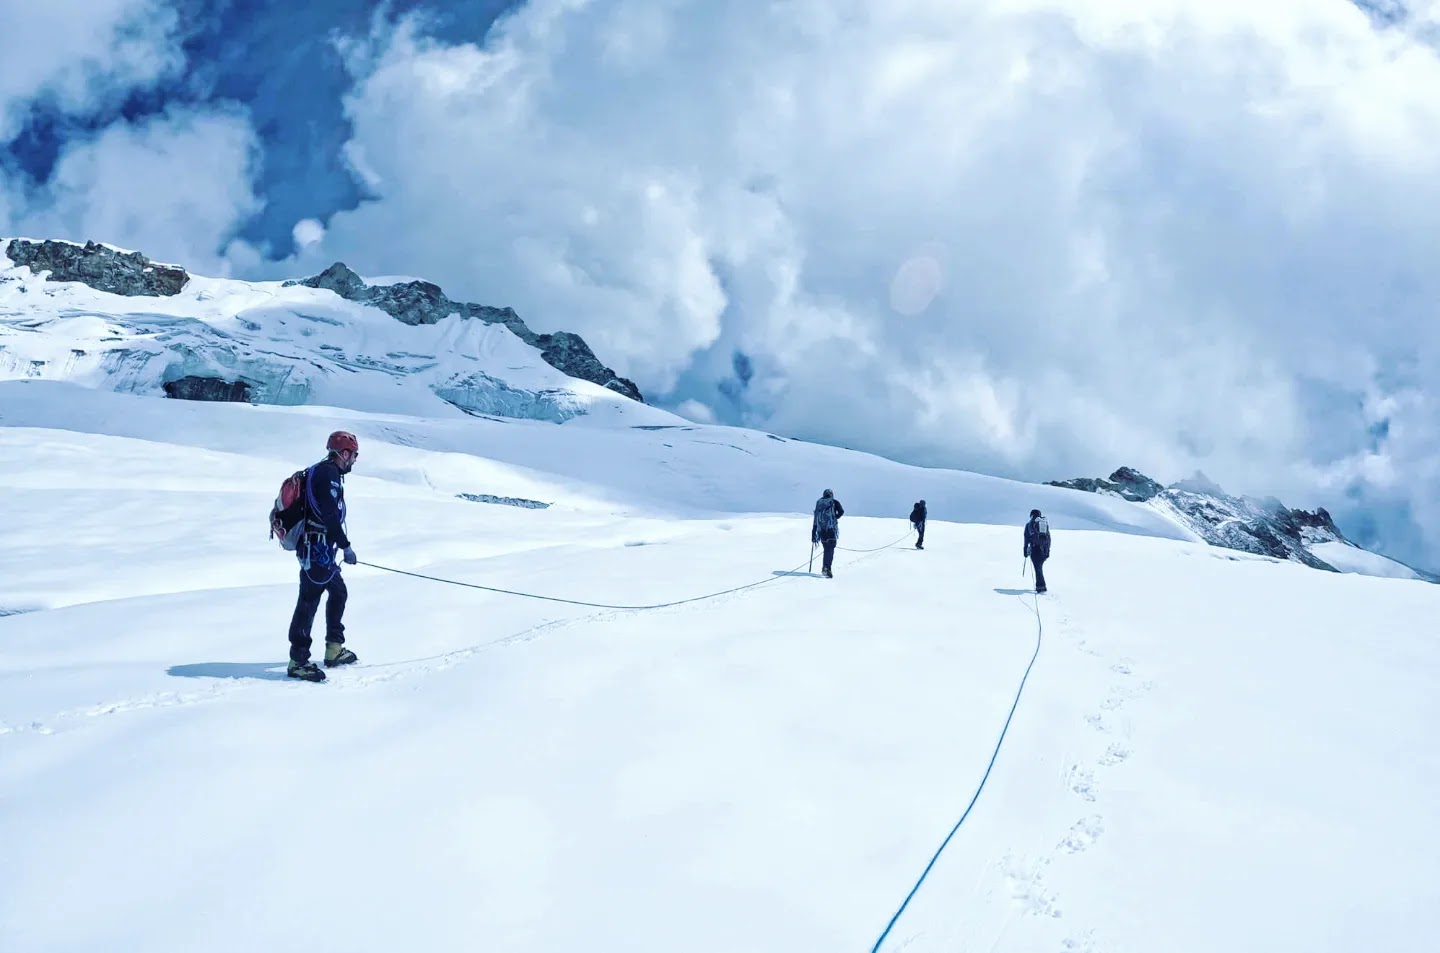 Four people with backpacks and connected to each other with ropes, trekking up a snow-covered mountain with peaks in the backgroun